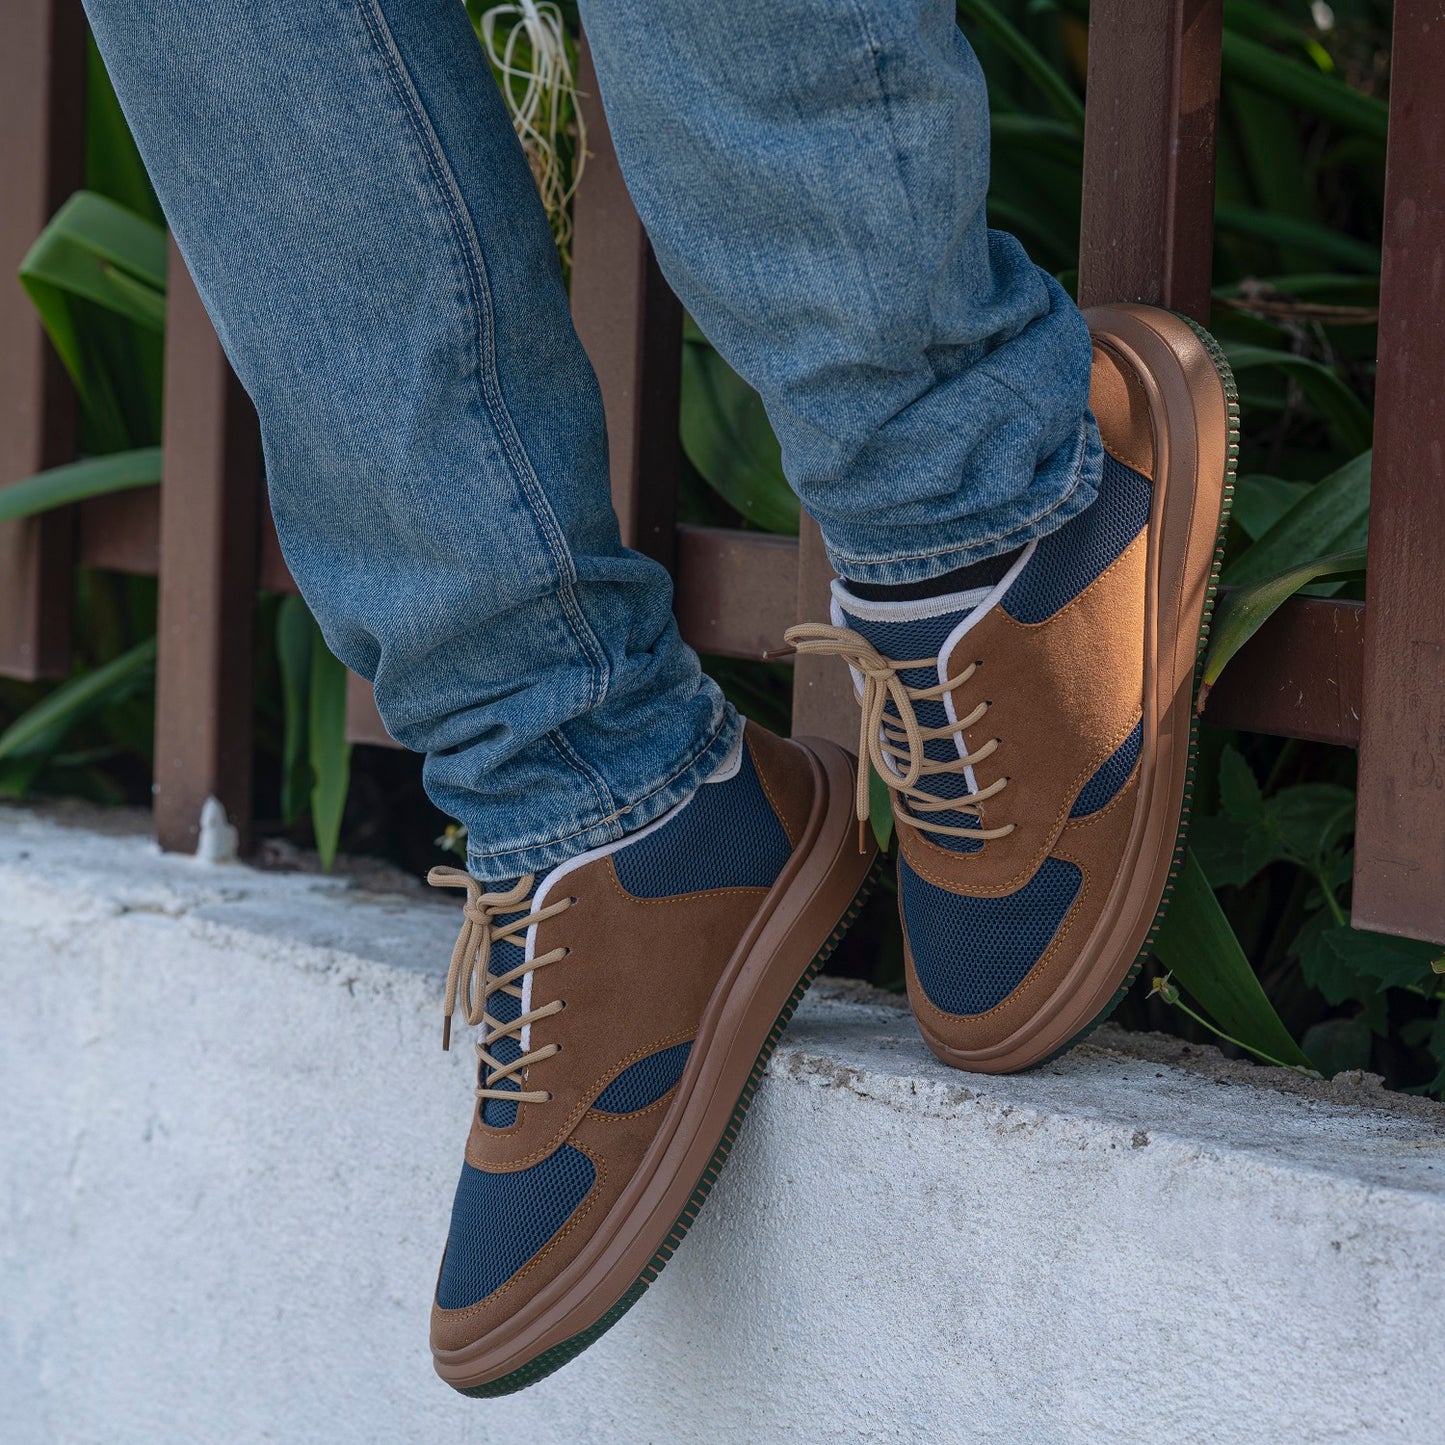 The Aurous Andorra Laceup Sneakers